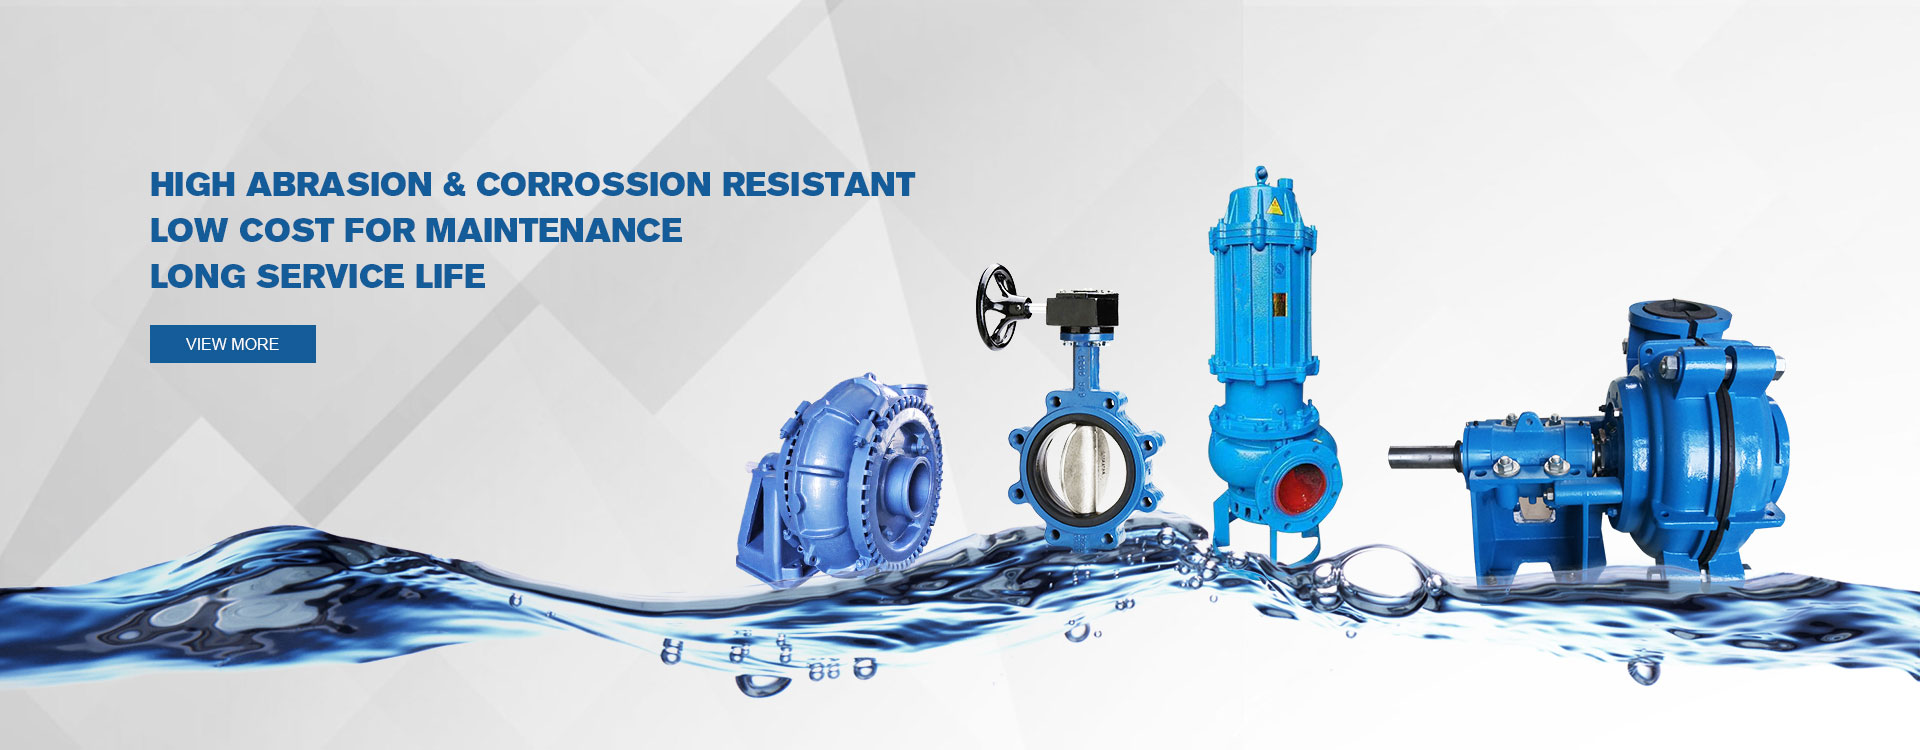 CZ stainless steel chemical pumps